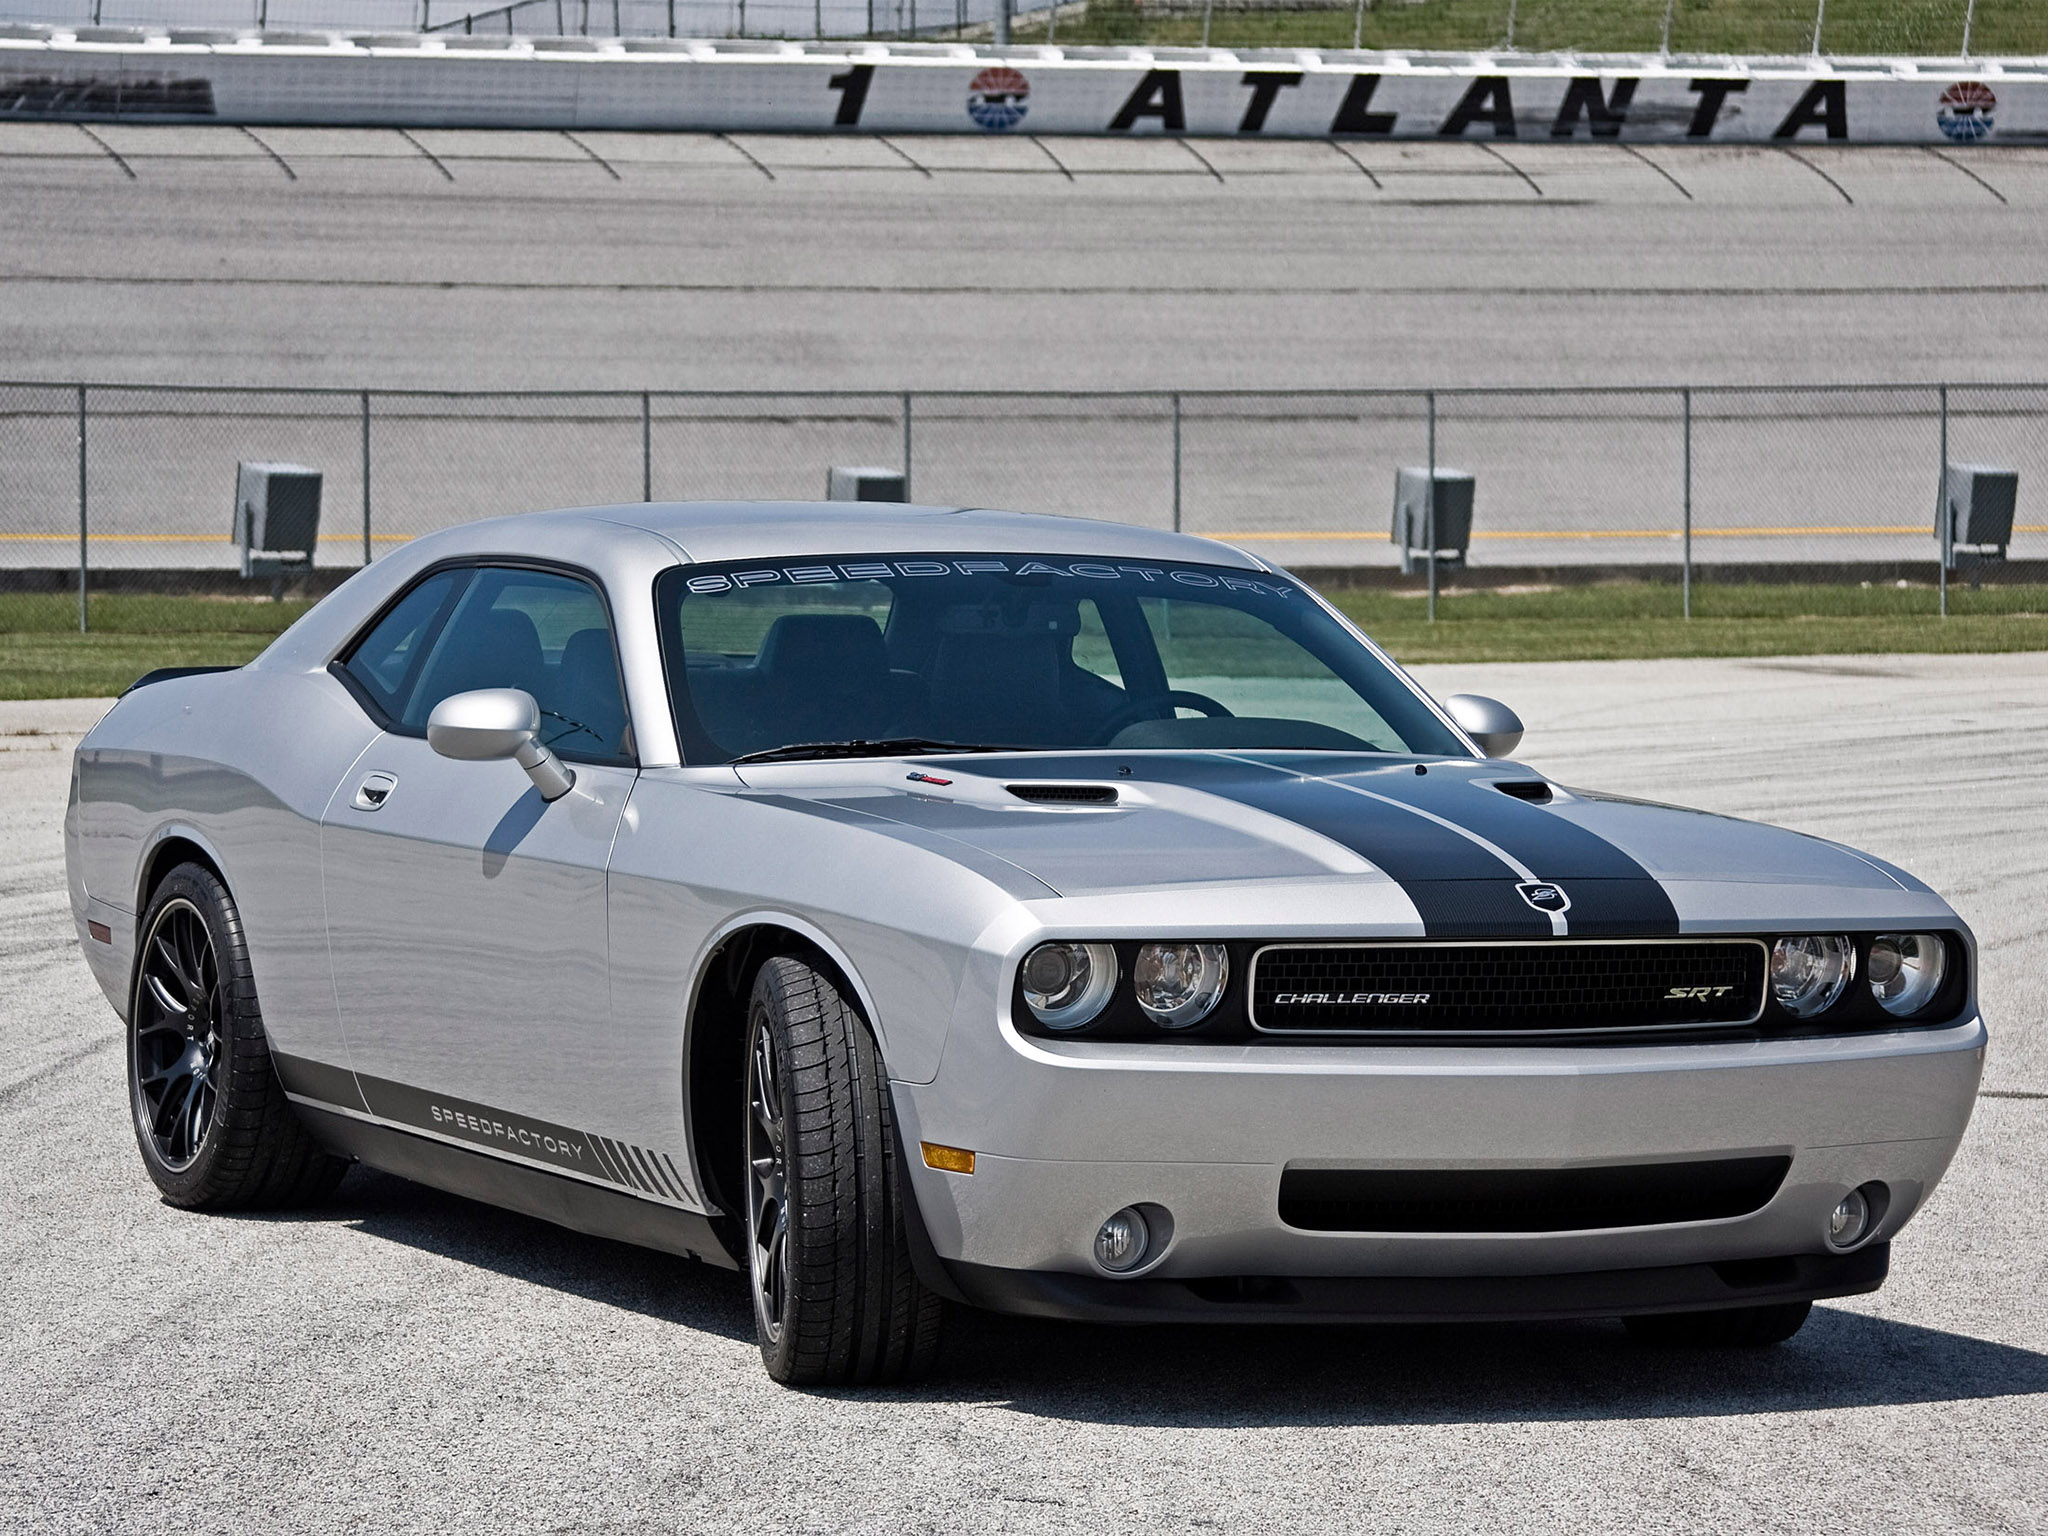 2010, Dodge, Challenger, Sf600r, Srt, Muscle, Tuning Wallpaper